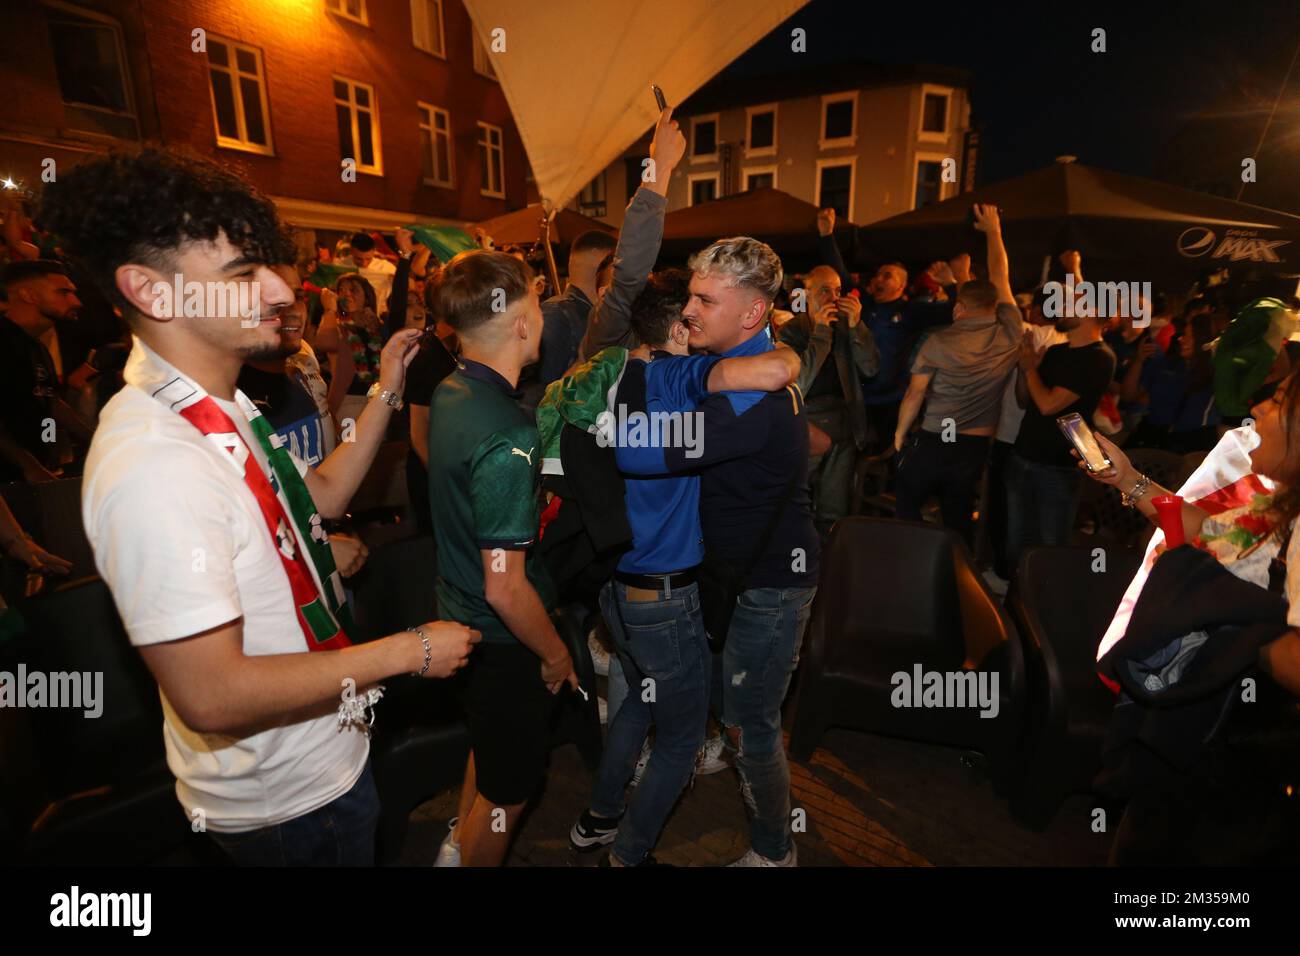 Illustration shows Italian supporters chearing after Italy wins the game in the city center of La Louviere, during the quarter final game of the Euro 2020 European Championship between the Belgian national soccer team Red Devils and Italy, in Munich, Germany, Friday 02 July 2021. BELGA PHOTO NICOLAS MAETERLINCK  Stock Photo